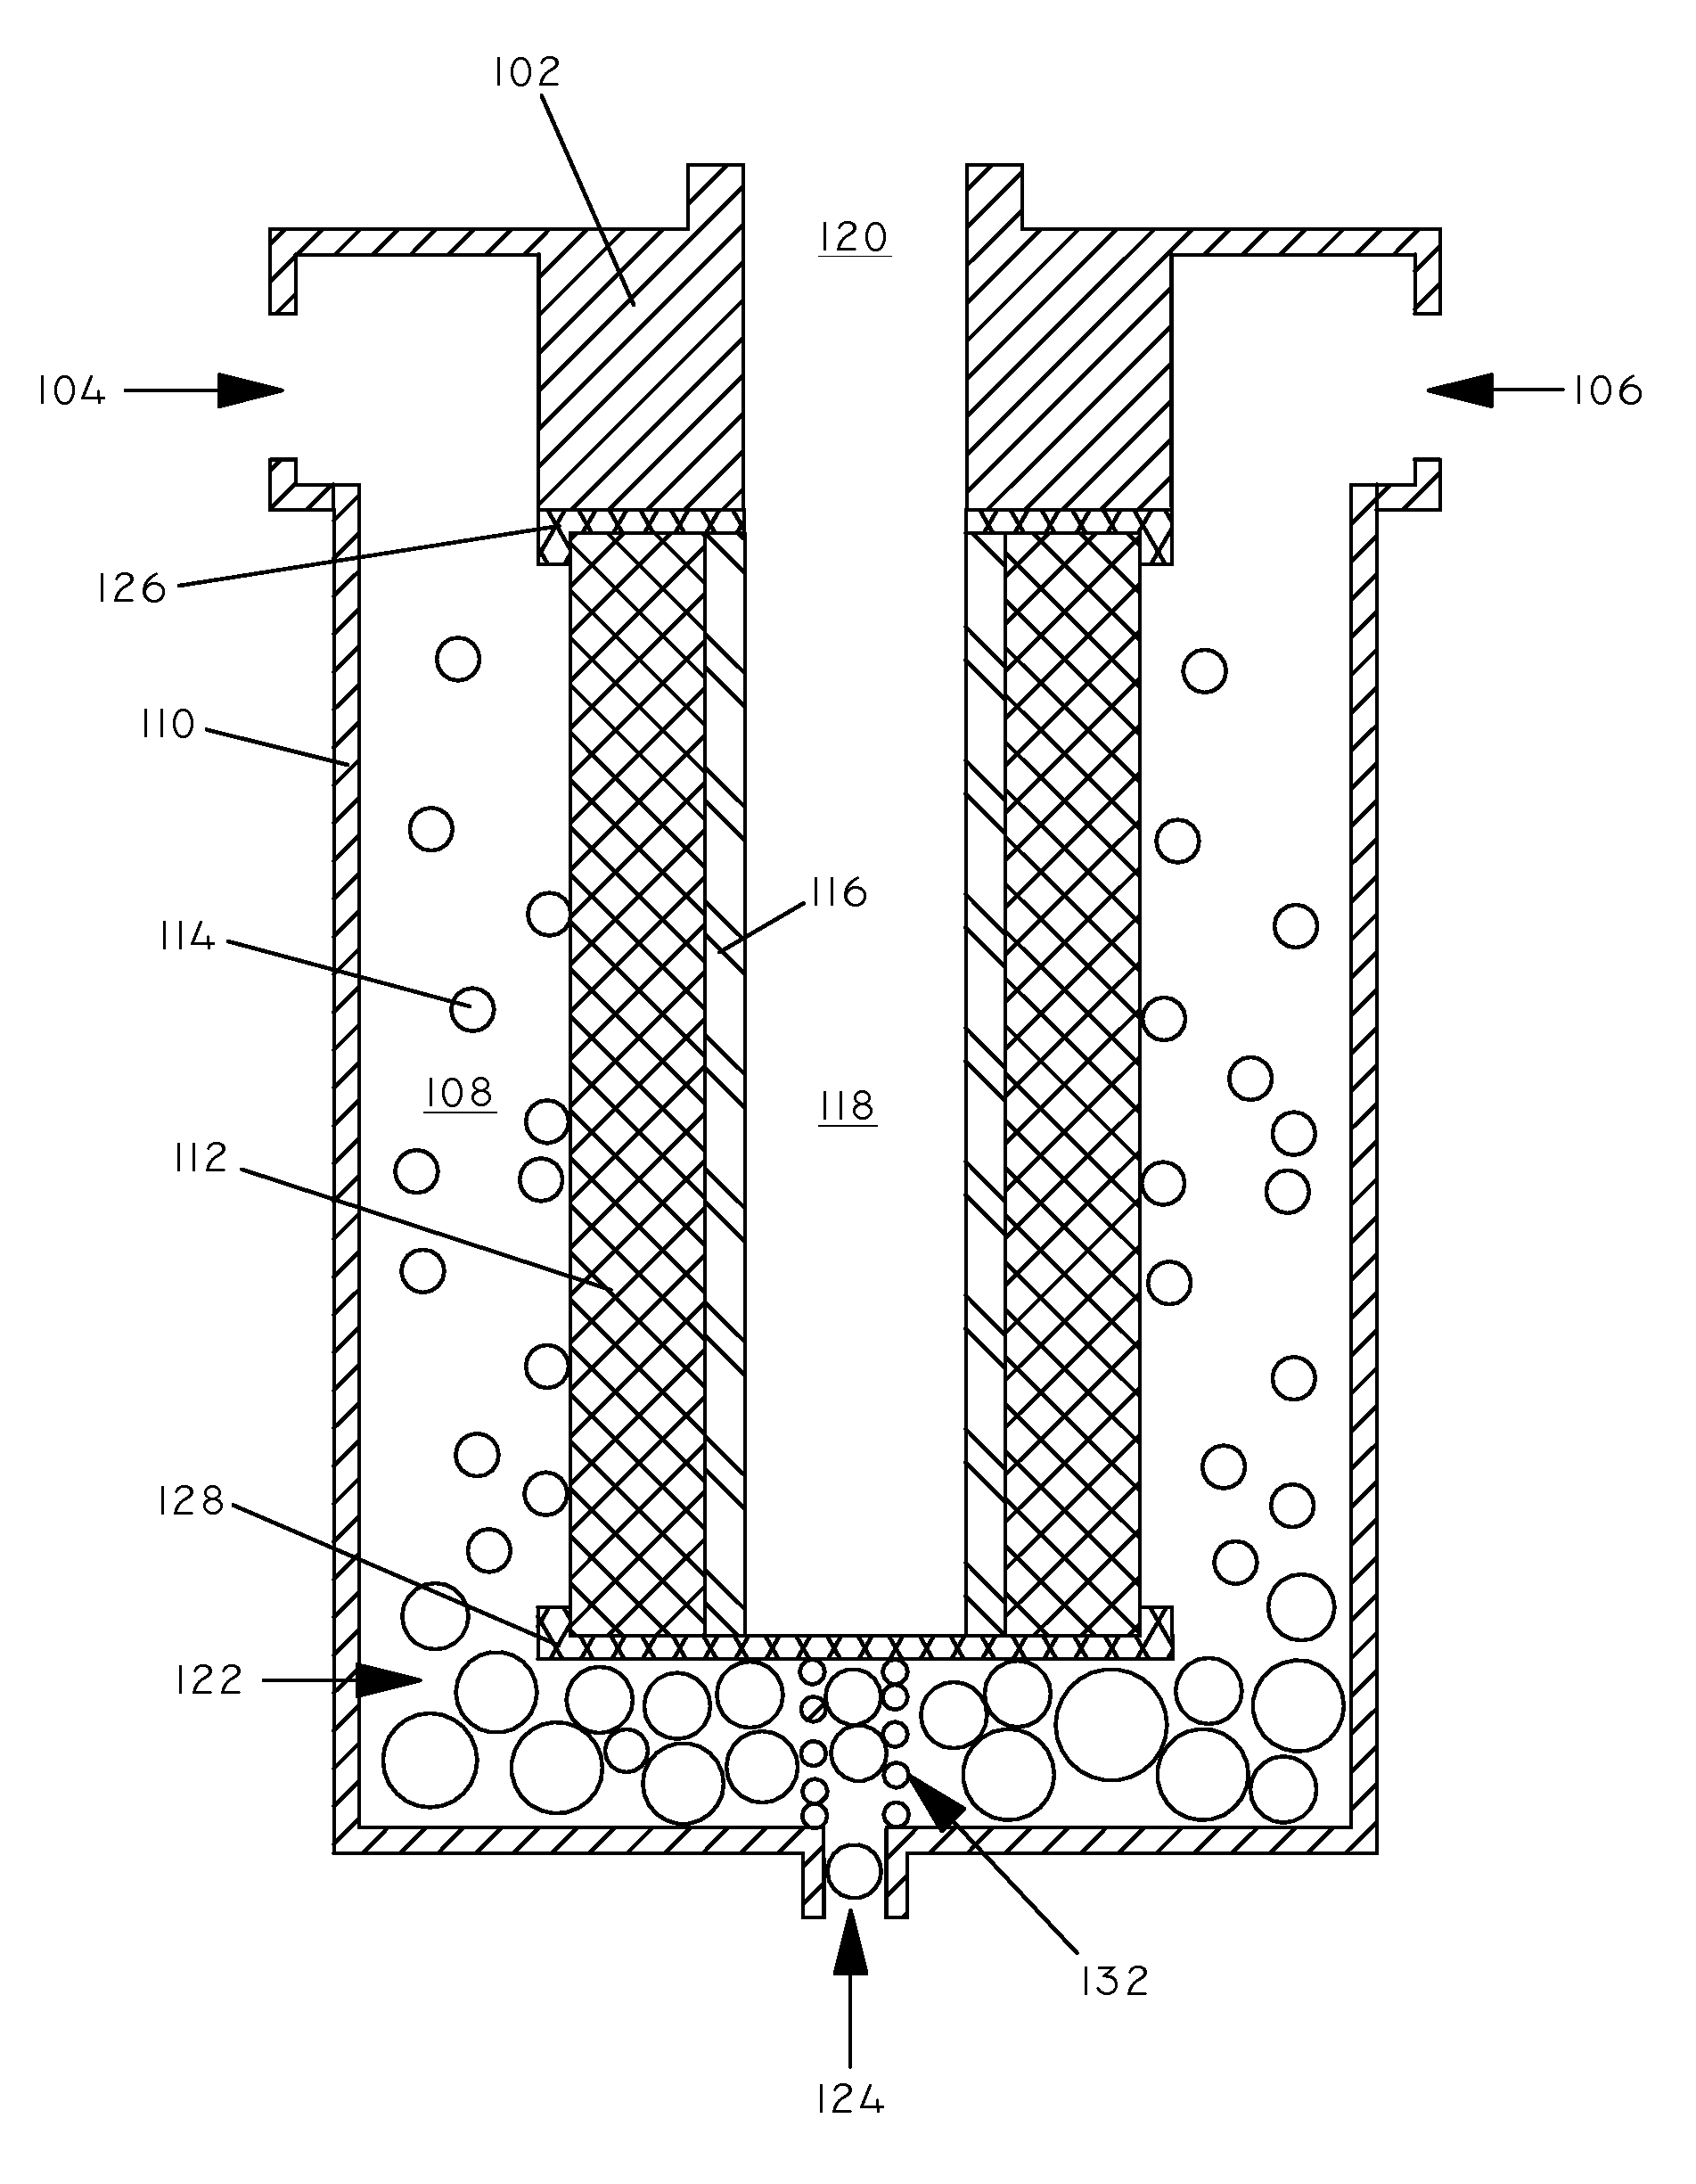 Systems, articles, and methods for removing water from hydrocarbon fluids